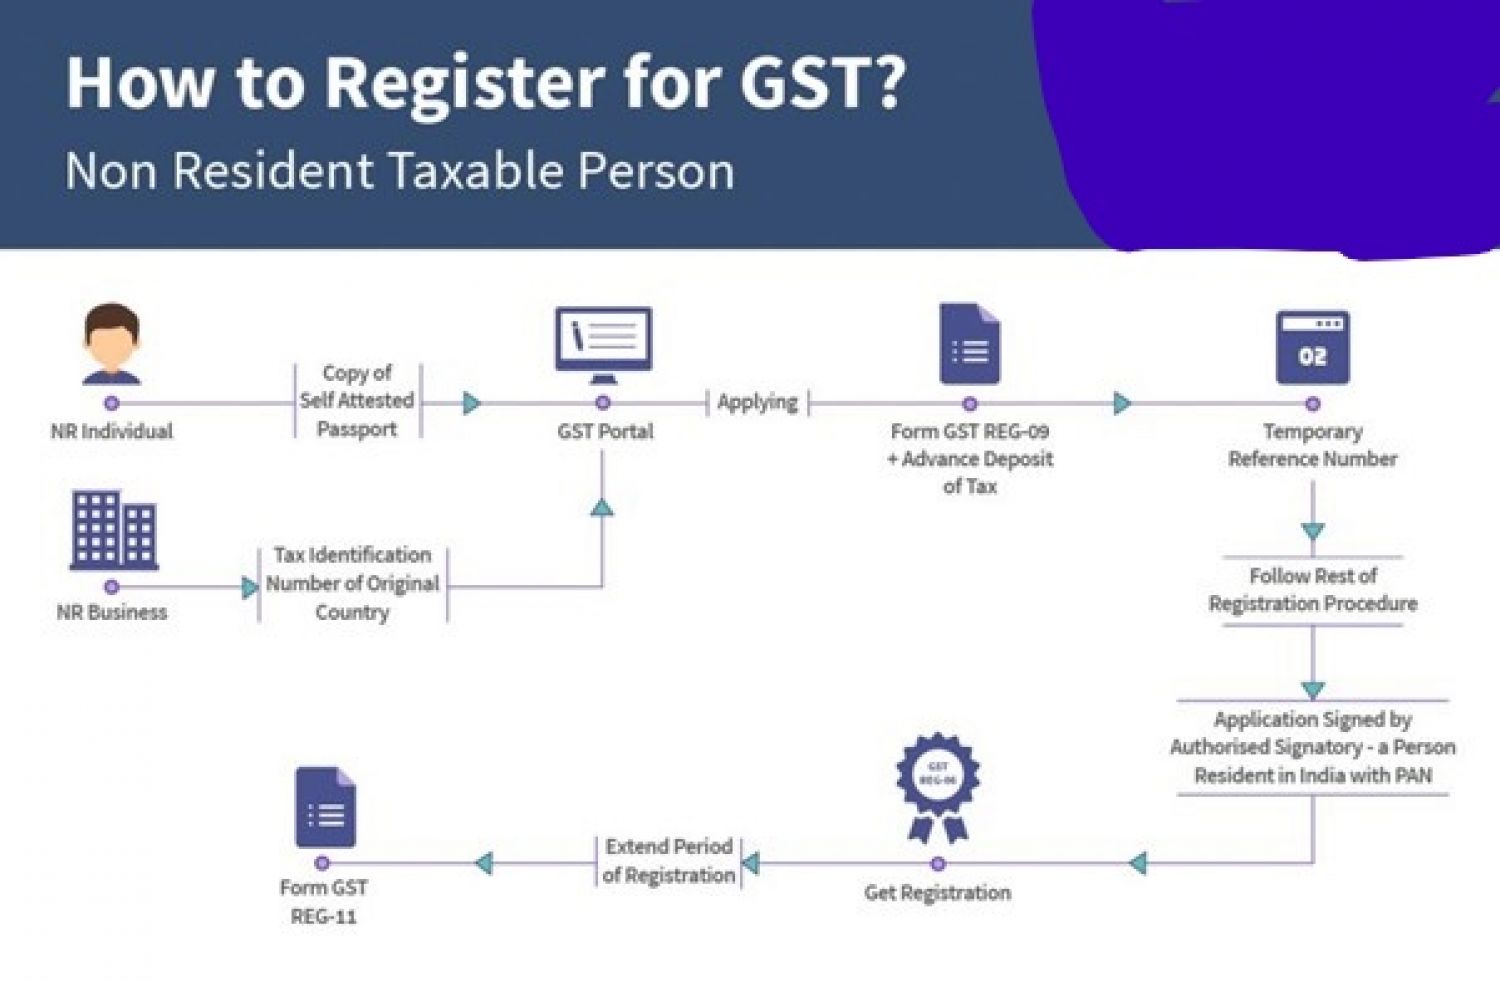 Provisions for GST Registration for foreigners in India